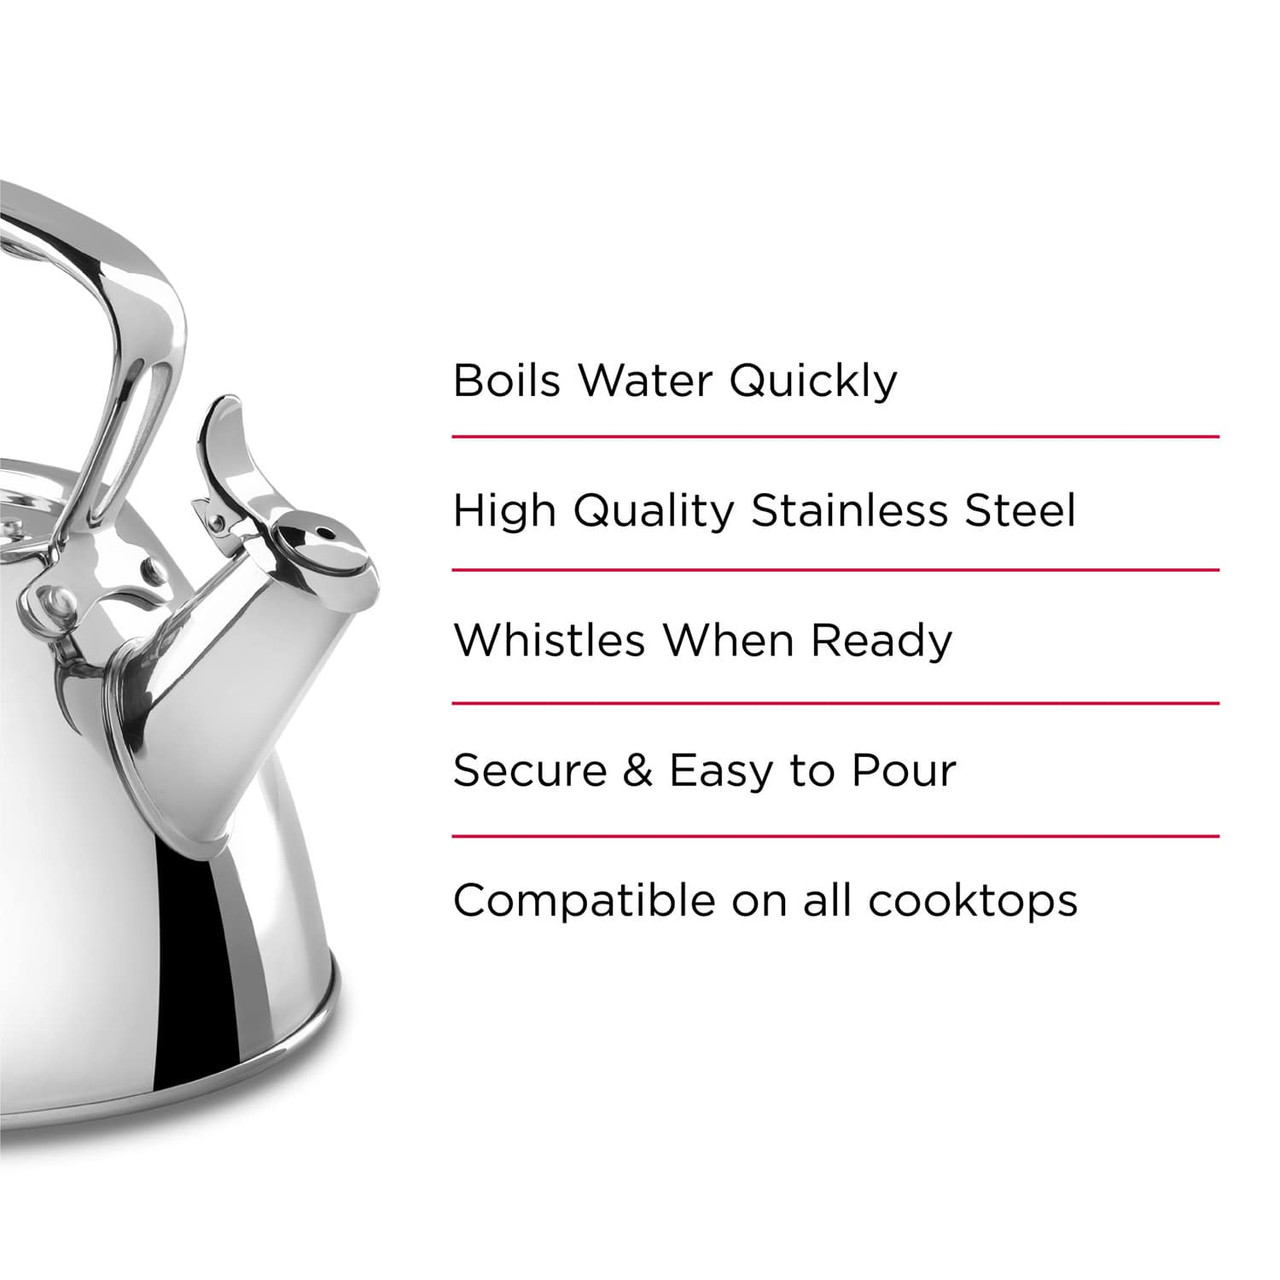 All-Clad Stainless Steel Stovetop Kettles